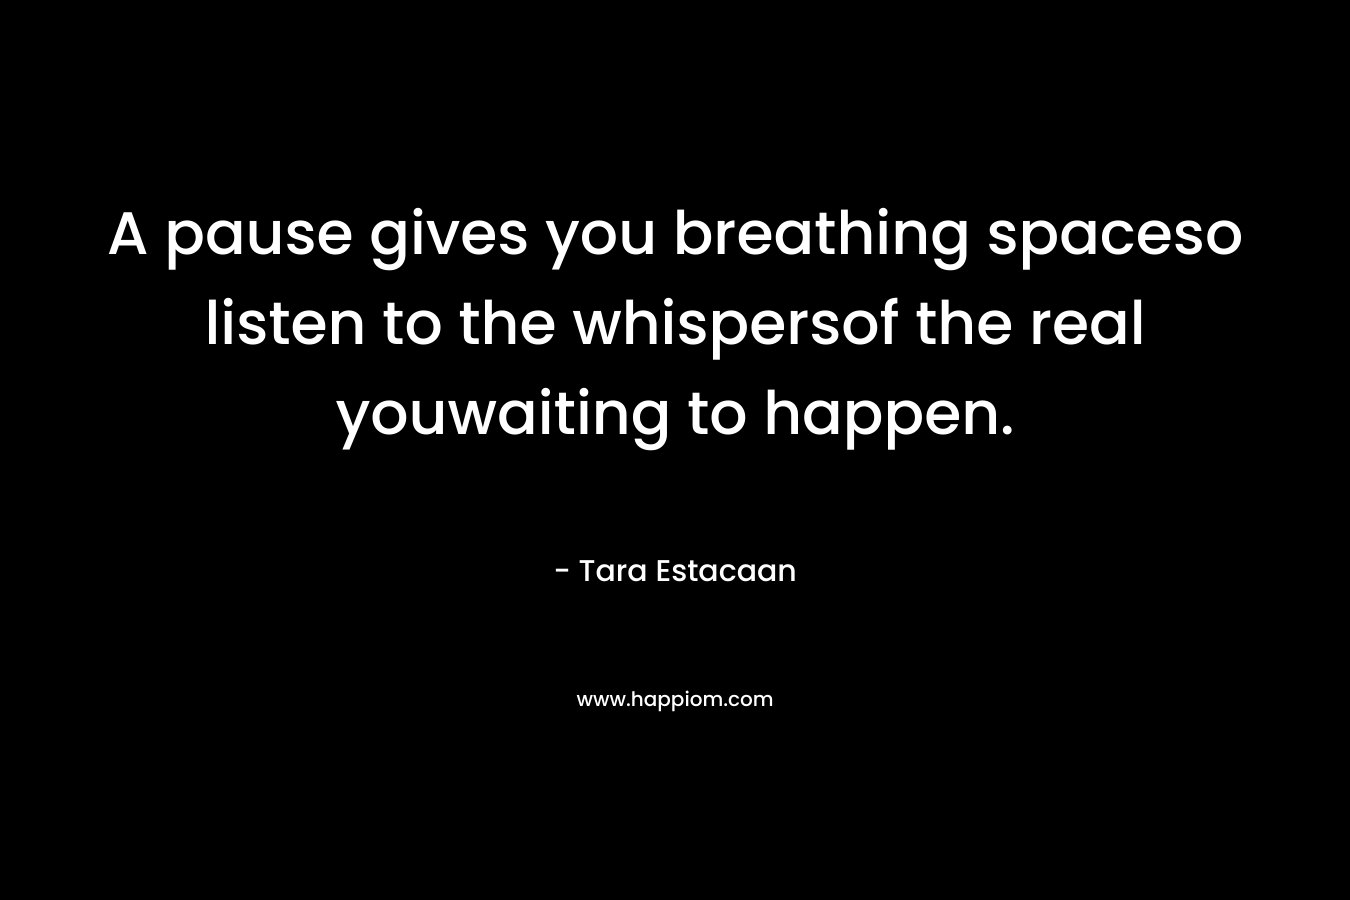 A pause gives you breathing spaceso listen to the whispersof the real youwaiting to happen. – Tara Estacaan